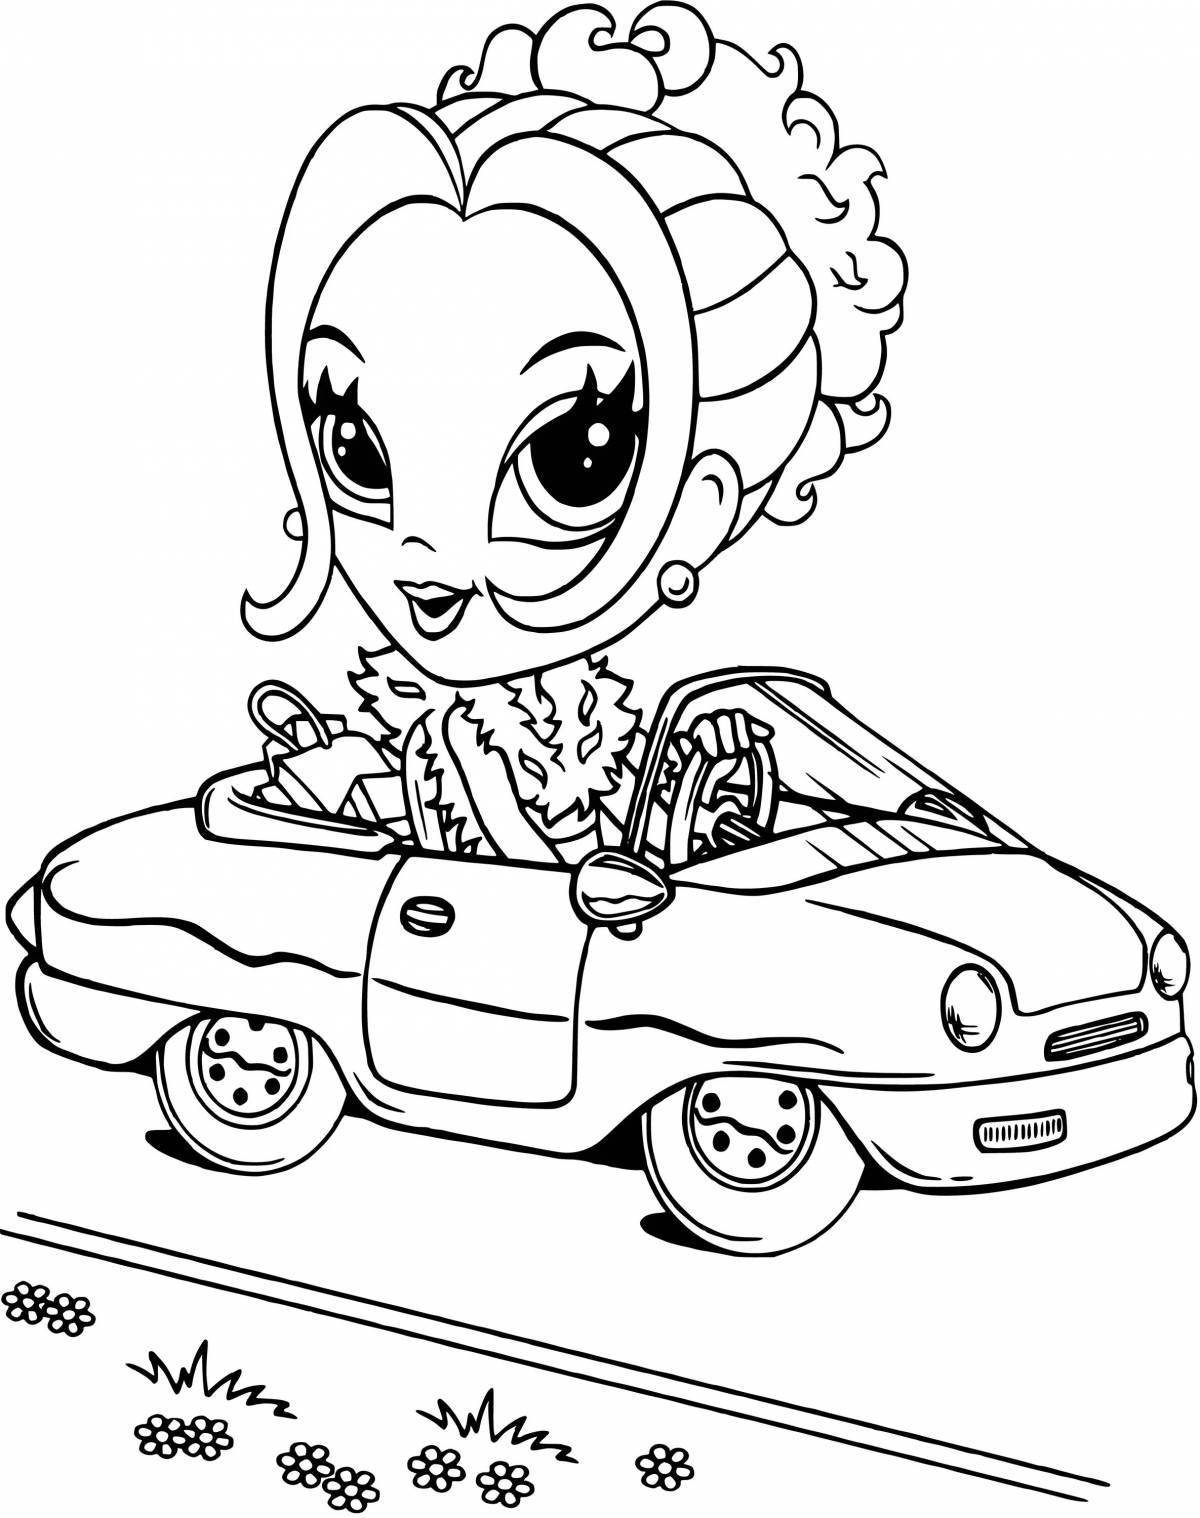 Inspirational coloring book coloring photo